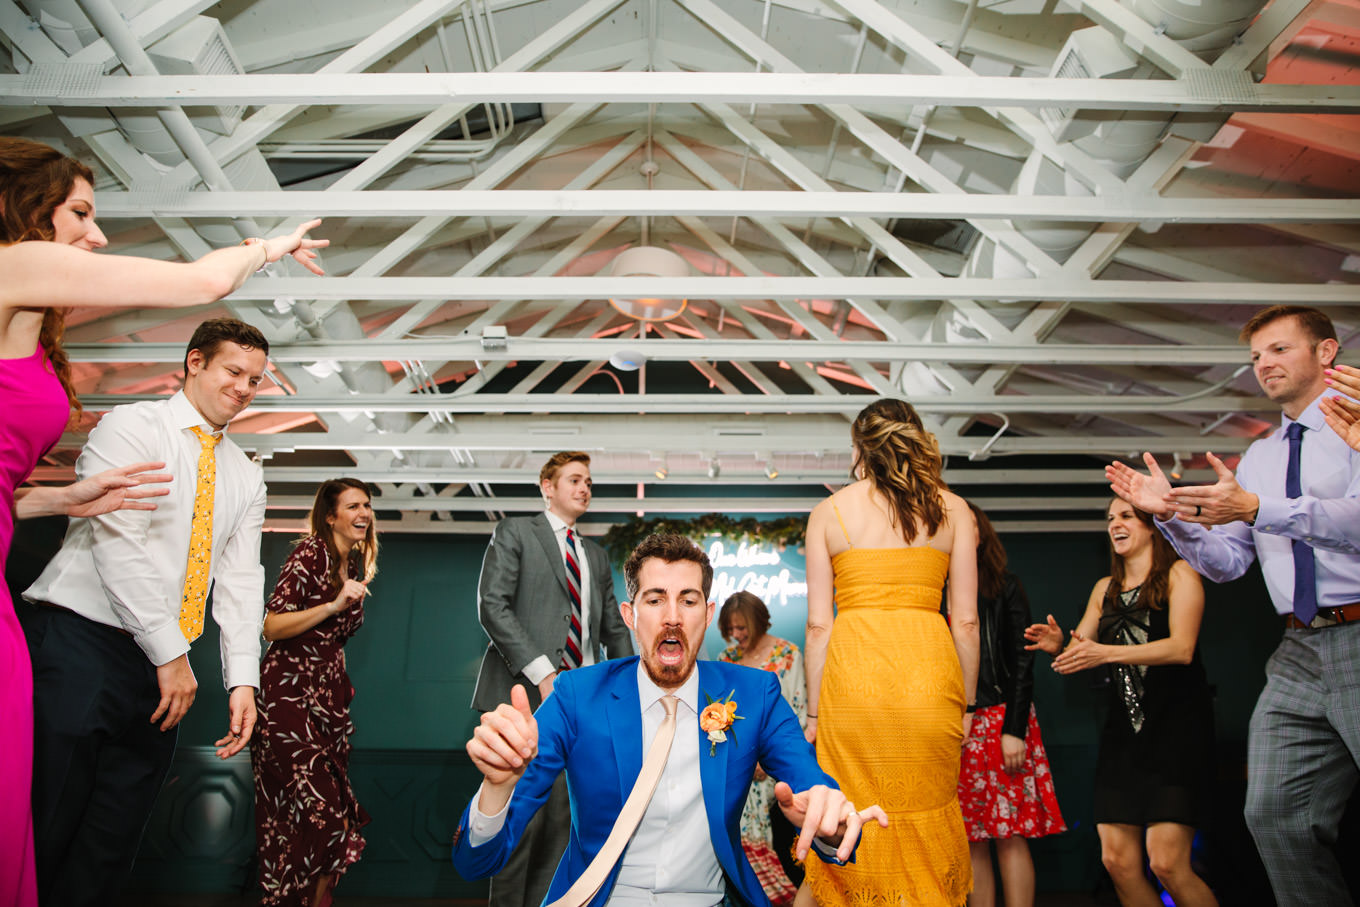 Dancing at wedding reception | TV inspired wedding at The Fig House Los Angeles | Published on The Knot | Fresh and colorful photography for fun-loving couples in Southern California | #losangeleswedding #TVwedding #colorfulwedding #theknot   Source: Mary Costa Photography | Los Angeles wedding photographer